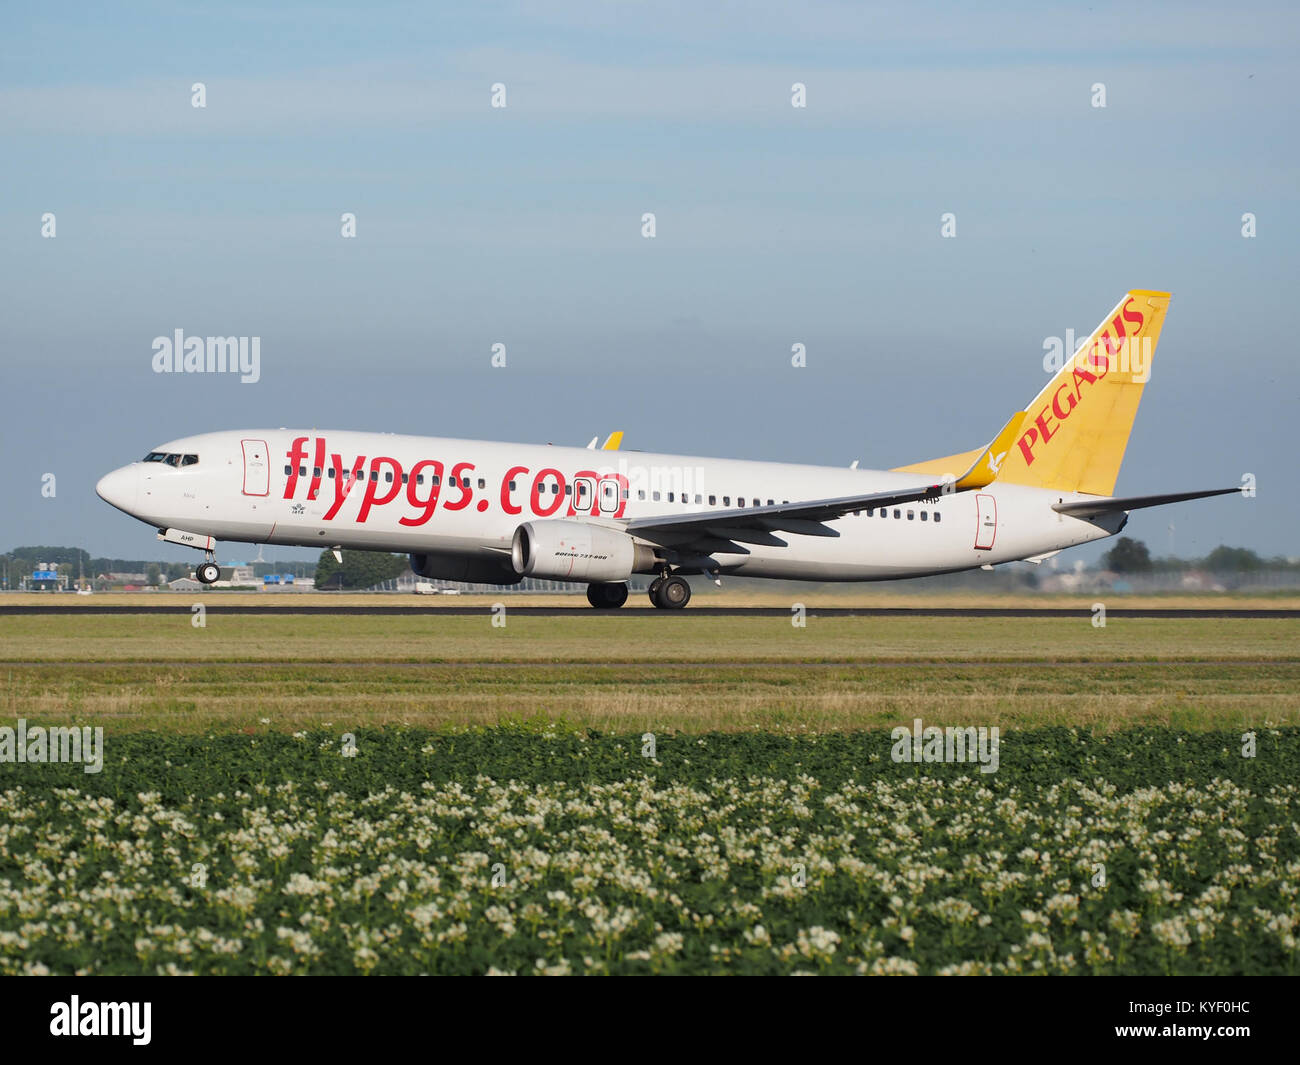 TC-AHP Pegasus Boeing 737-82R(WL) cn40721 takeoff from Schiphol (AMS - EHAM), The Netherlands pic1 Stock Photo